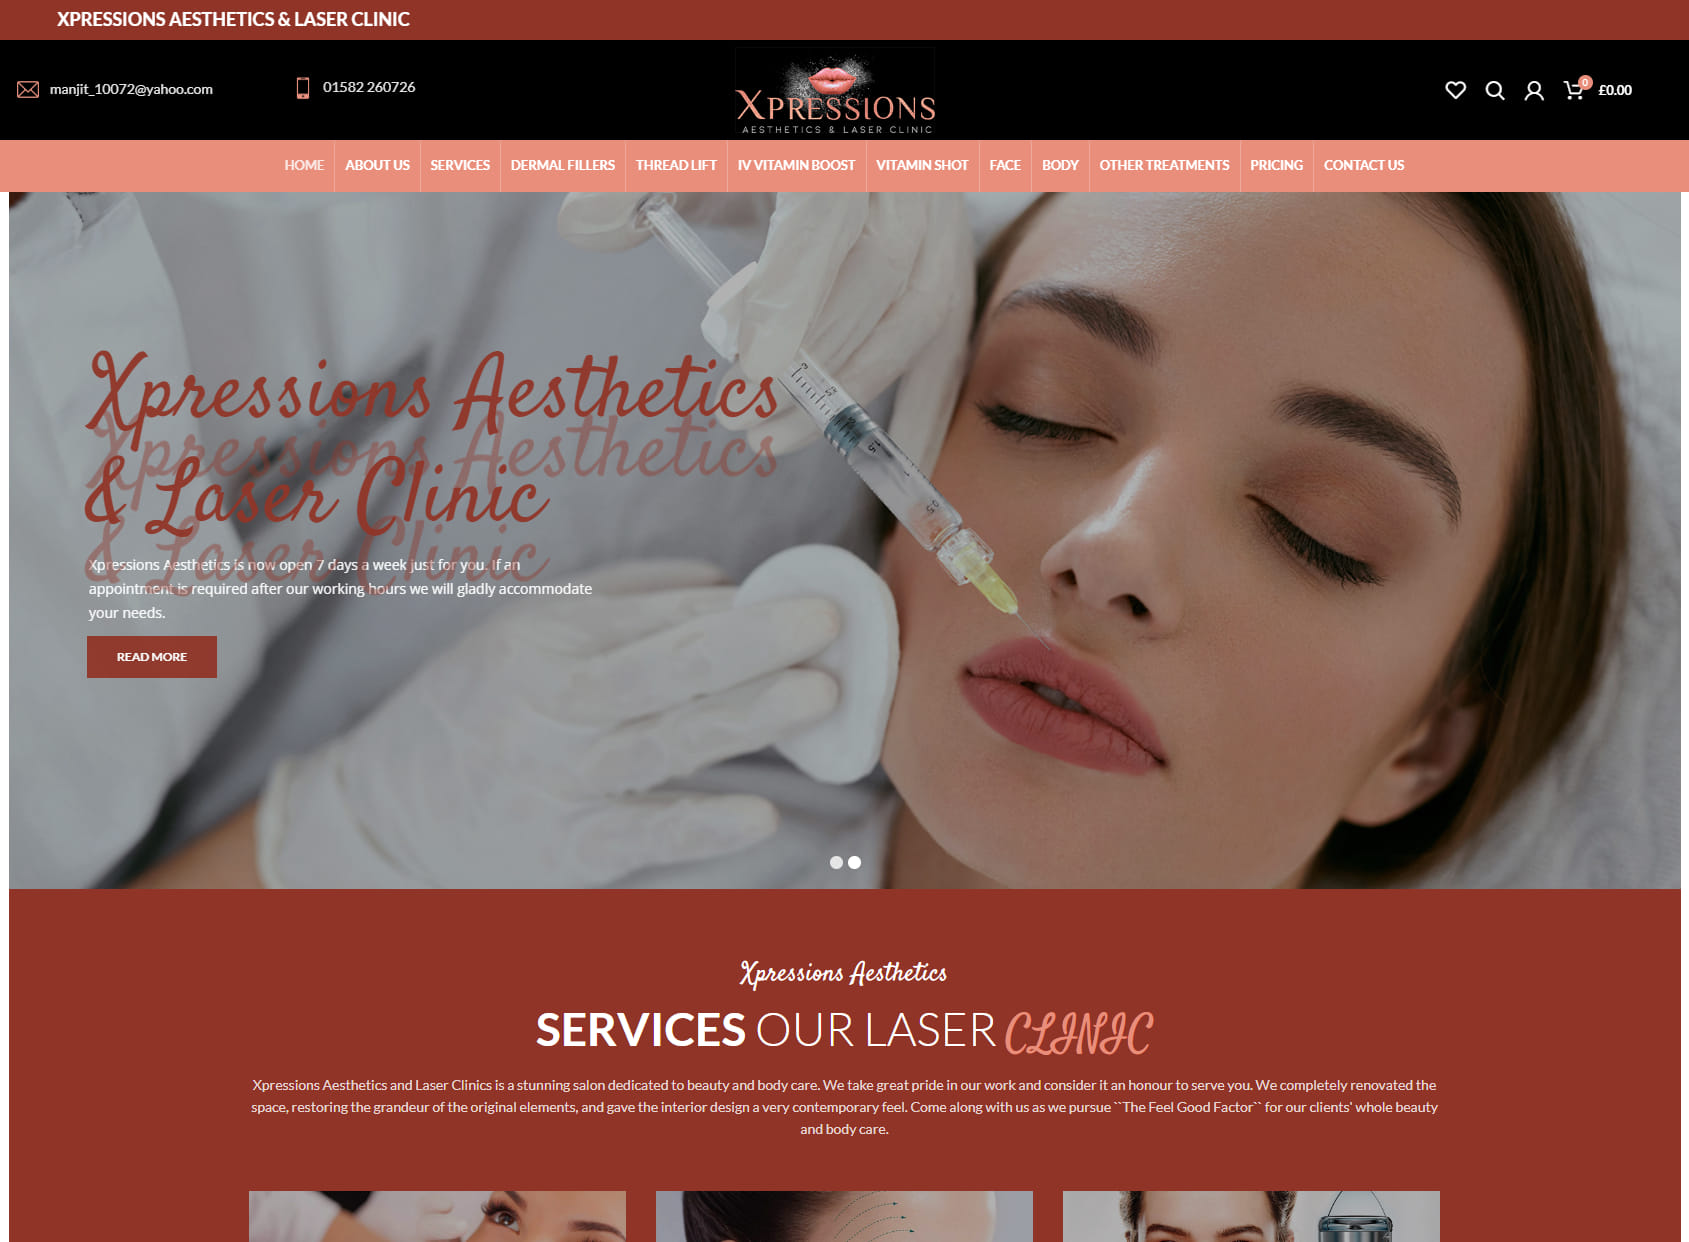 Xpressions Aesthetics & Laser Clinic